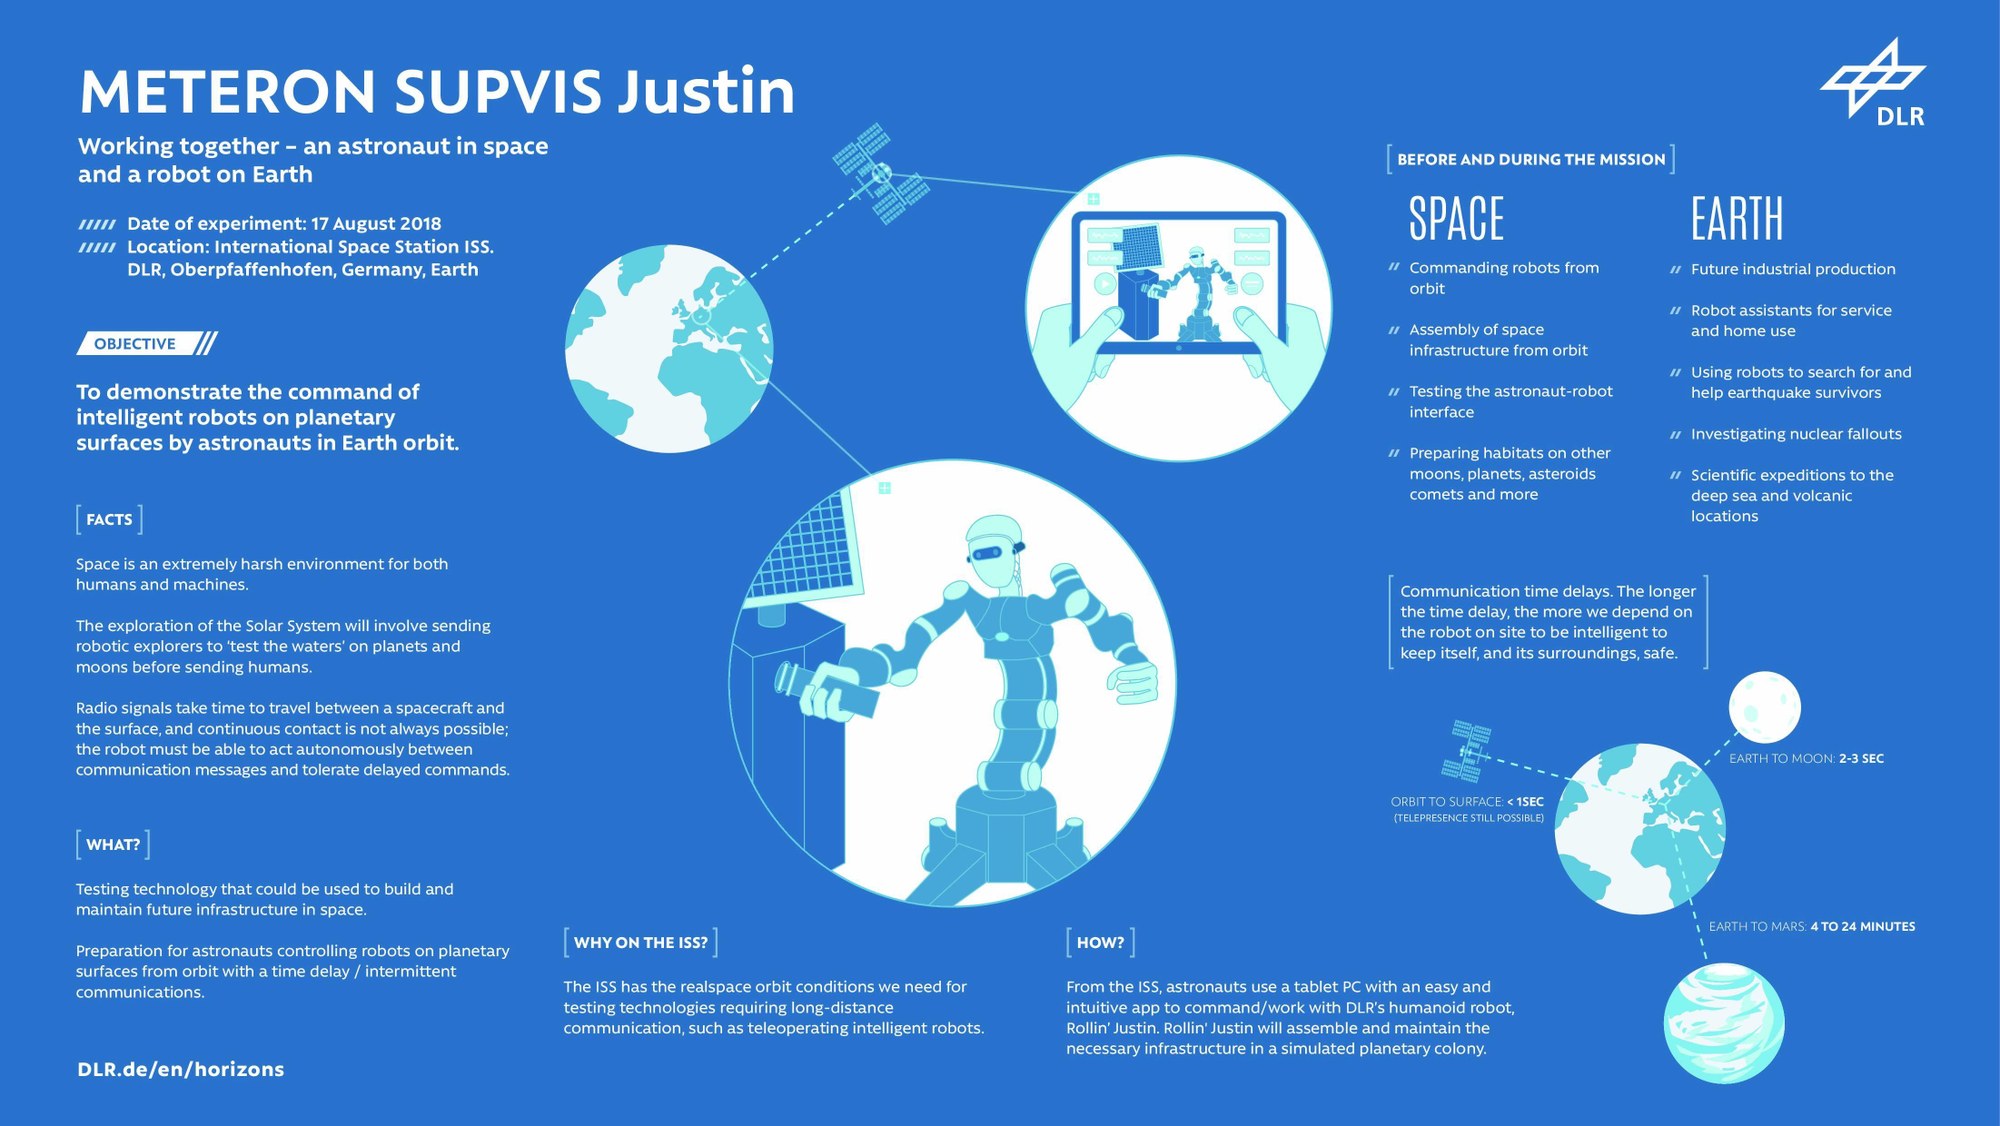 METERON SUPVIS Justin - an astronaut in space and a robot on Earth working together